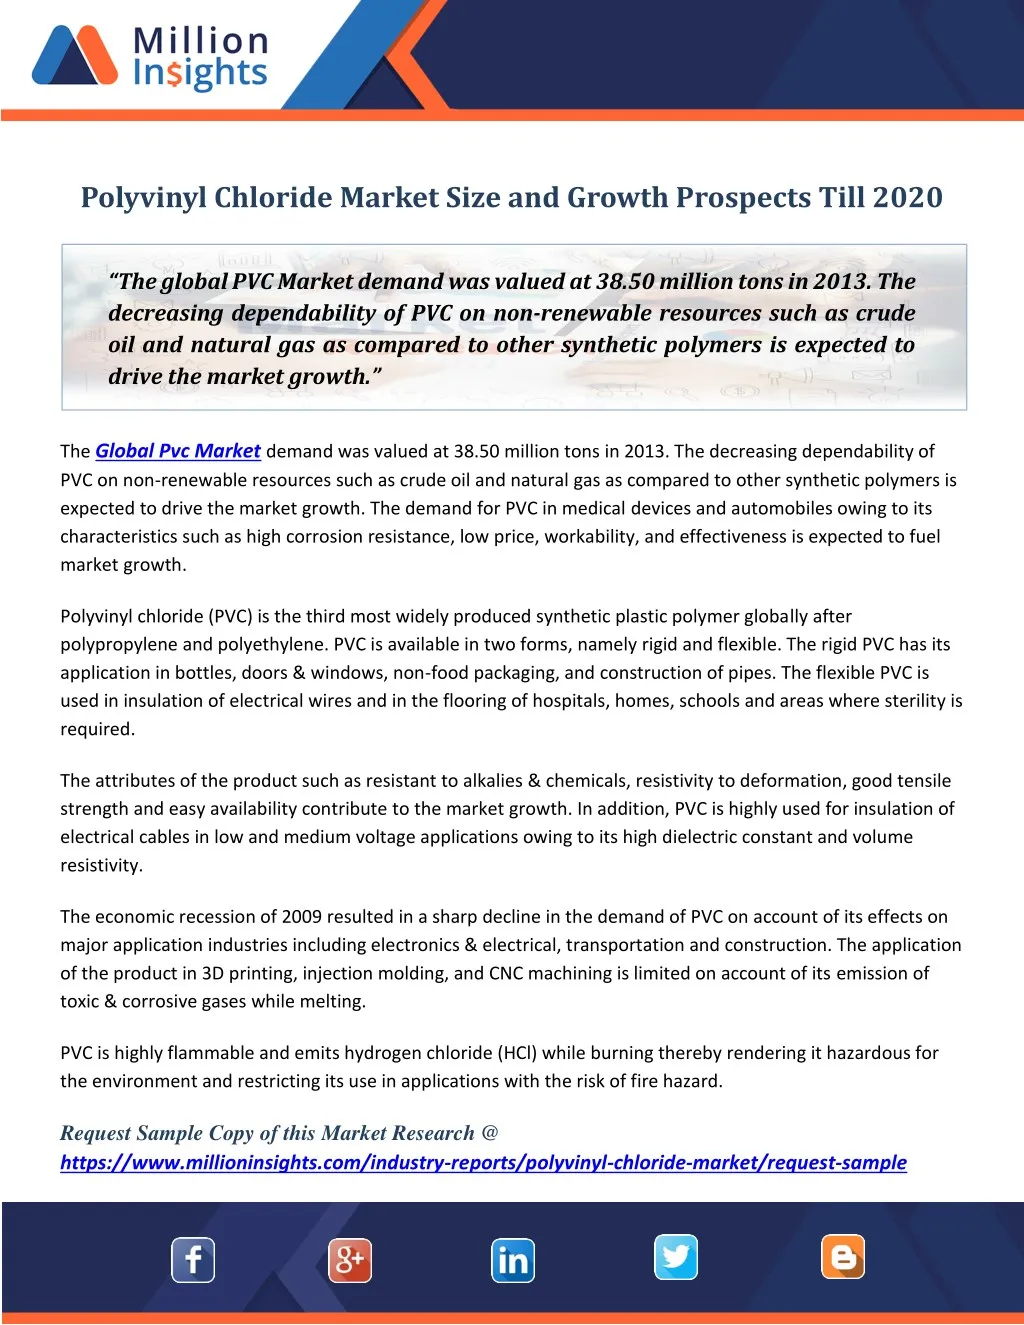 polyvinyl chloride market size and growth